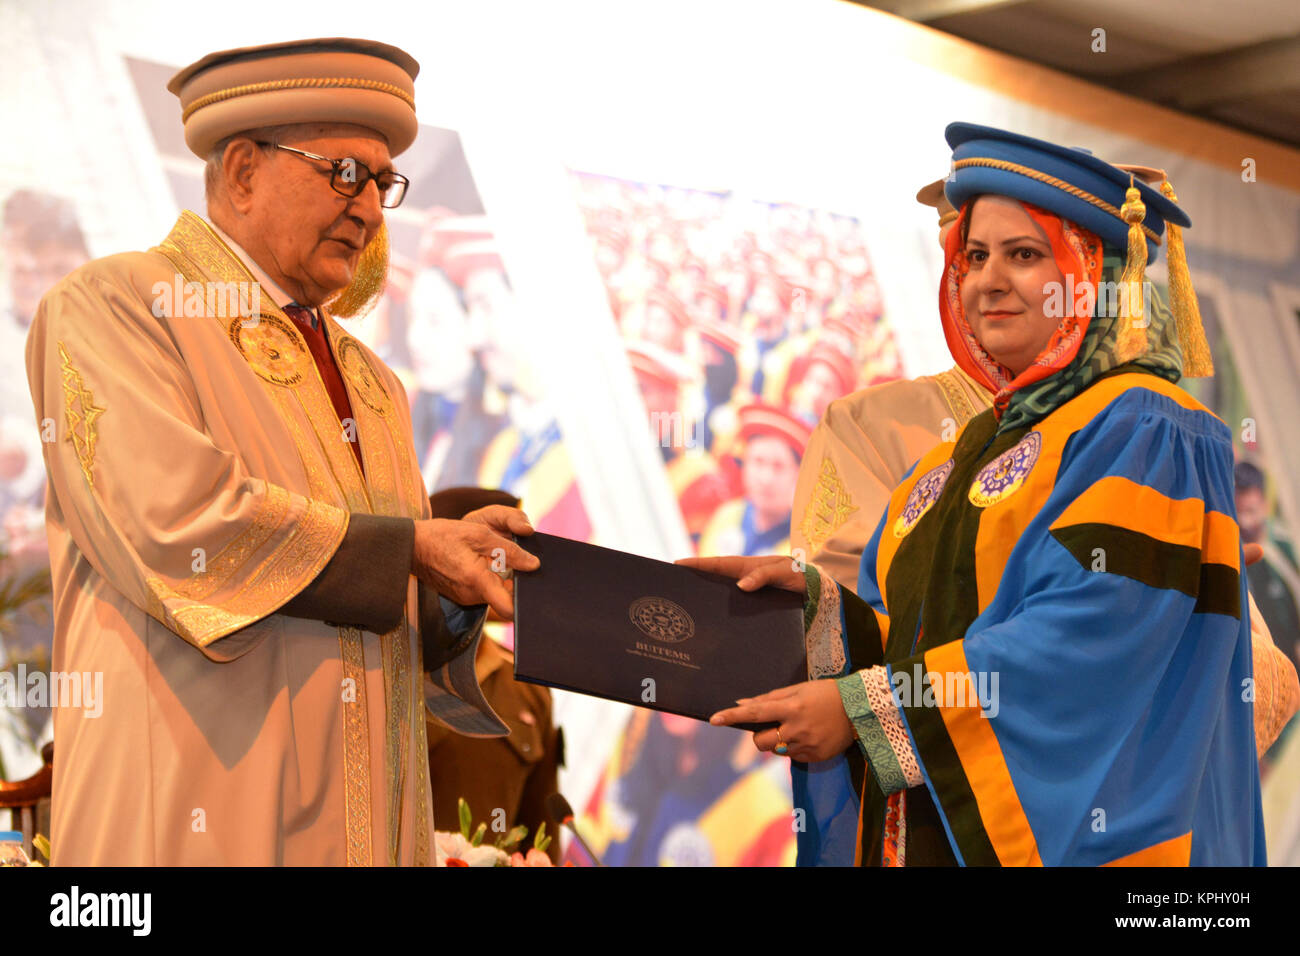 QUETTA, PAKISTAN. Dec-14 2017: Chancellor and Governor of Balochistan Mr. Muhammad Khan Achakzai awarding doctorate degree to PHD holders during cerem Stock Photo